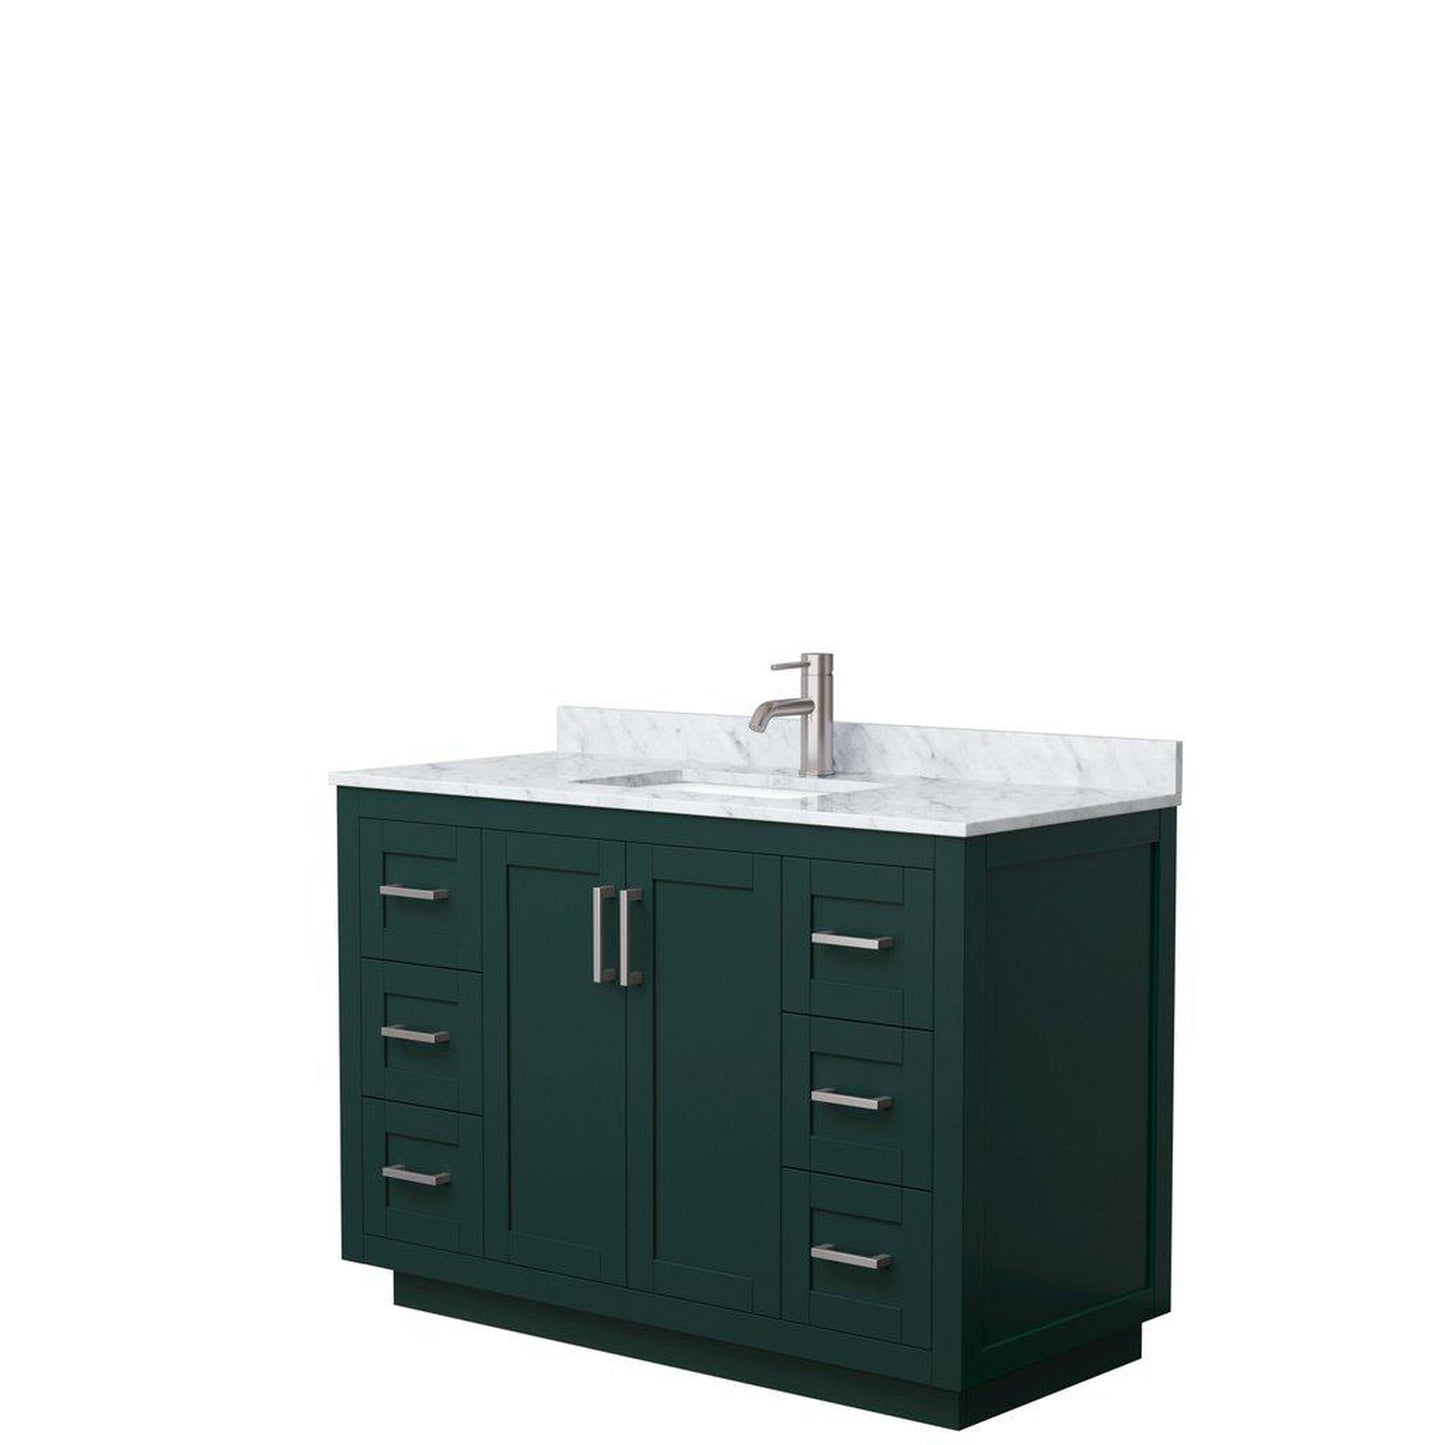 Wyndham Collection Miranda 48" Single Bathroom Green Vanity Set With White Carrara Marble Countertop, Undermount Square Sink, And Brushed Nickel Trim